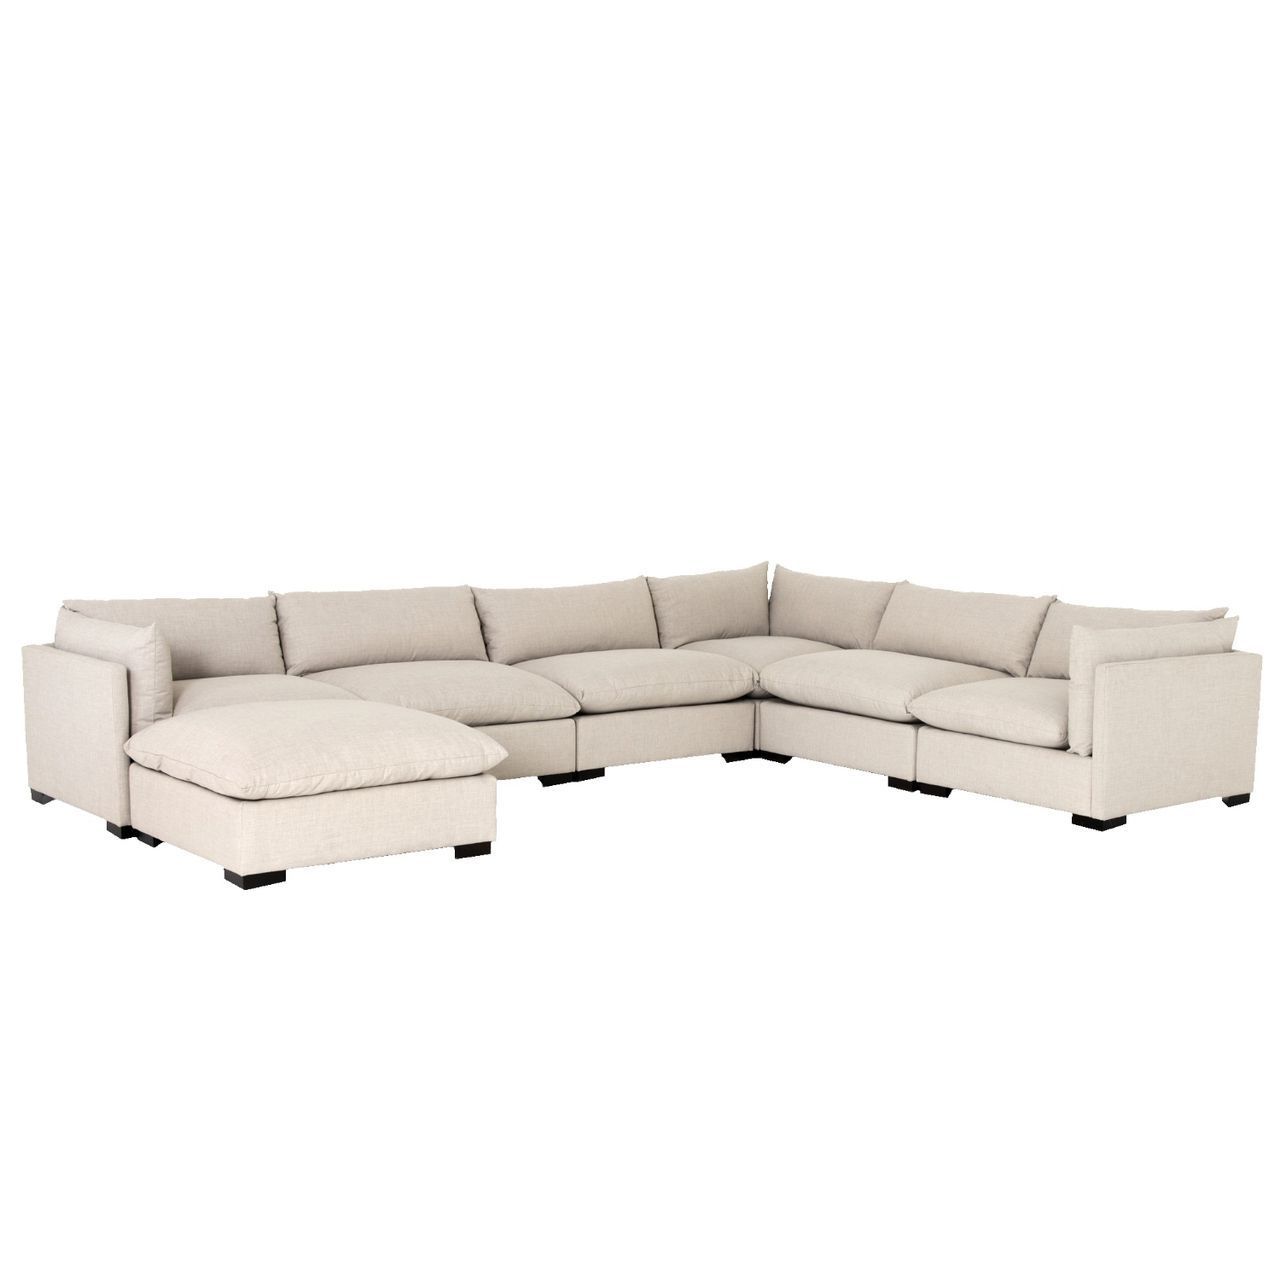 Small L Shaped Sectional Sofas In Beige Inside Fashionable Westworld Modern Beige 7 Piece L Shape Sectional Sofa 156" (View 10 of 15)